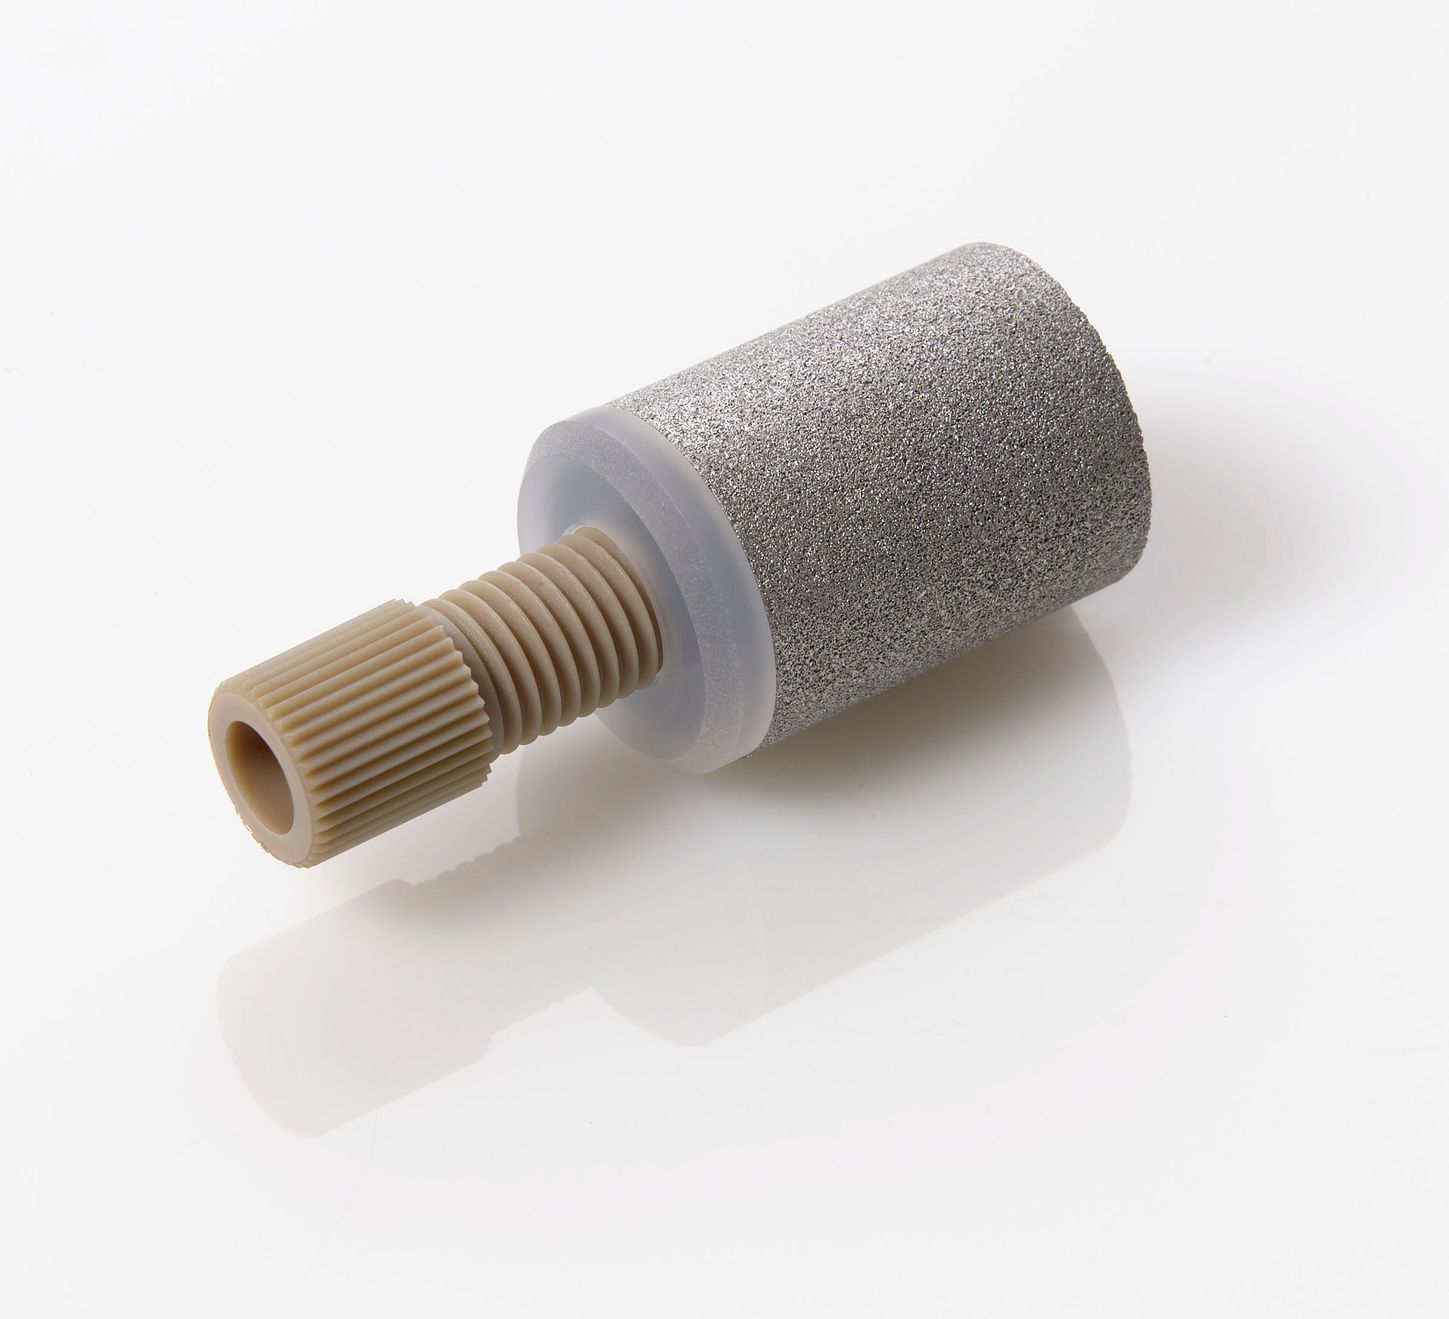 Solvent Filter 20um Stainless Steel with 5/16-24 Nut and Ferrule for 3/16 or 4mm OD Tubing